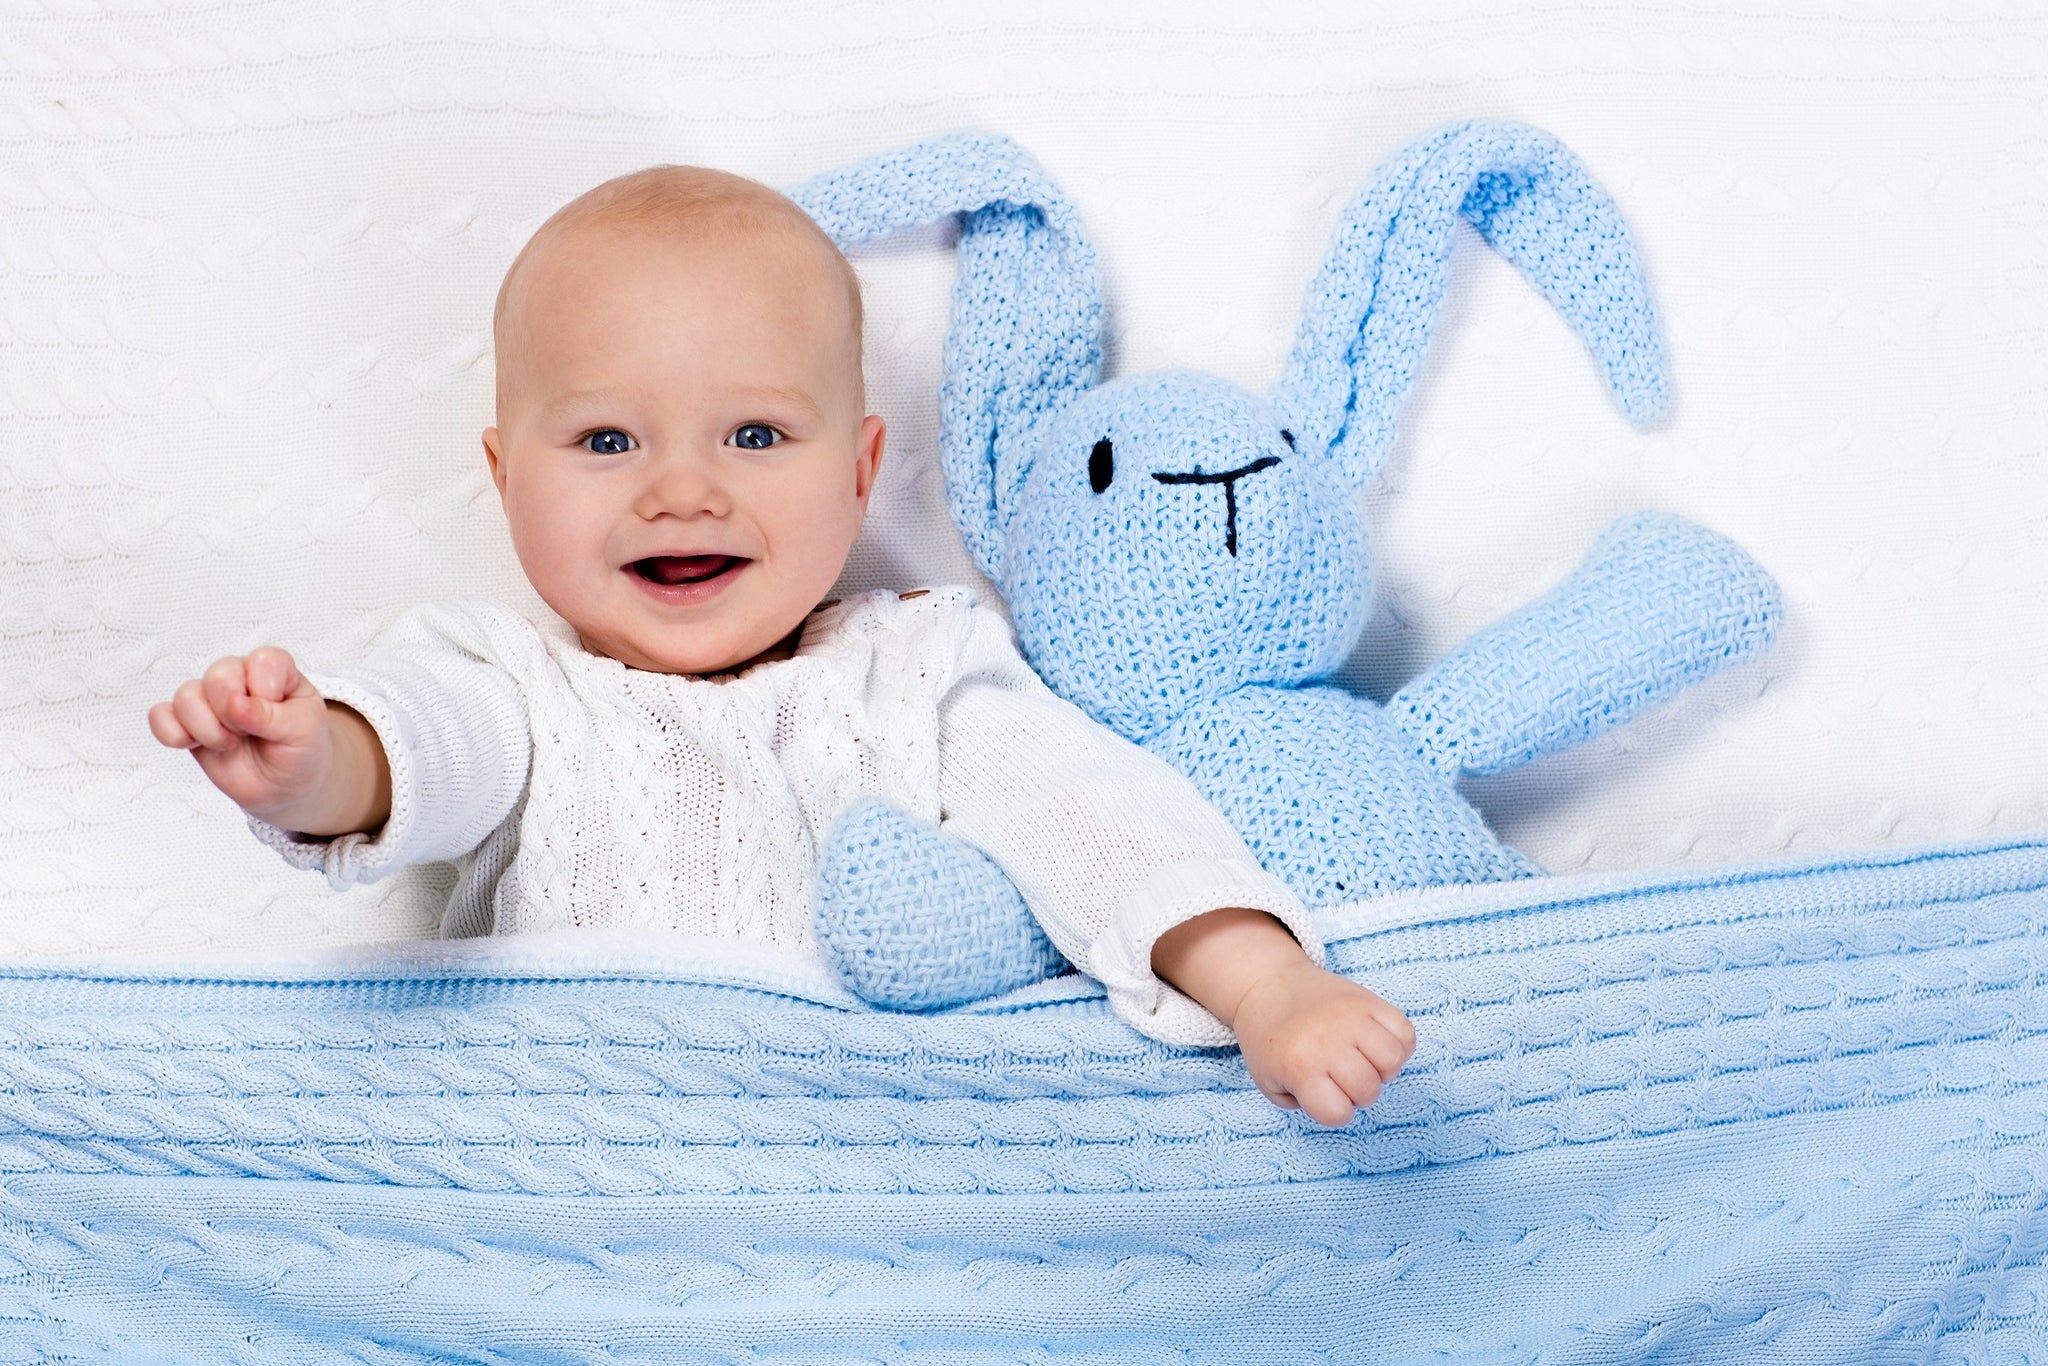 baby mattresses at affordable prices - with cute baby